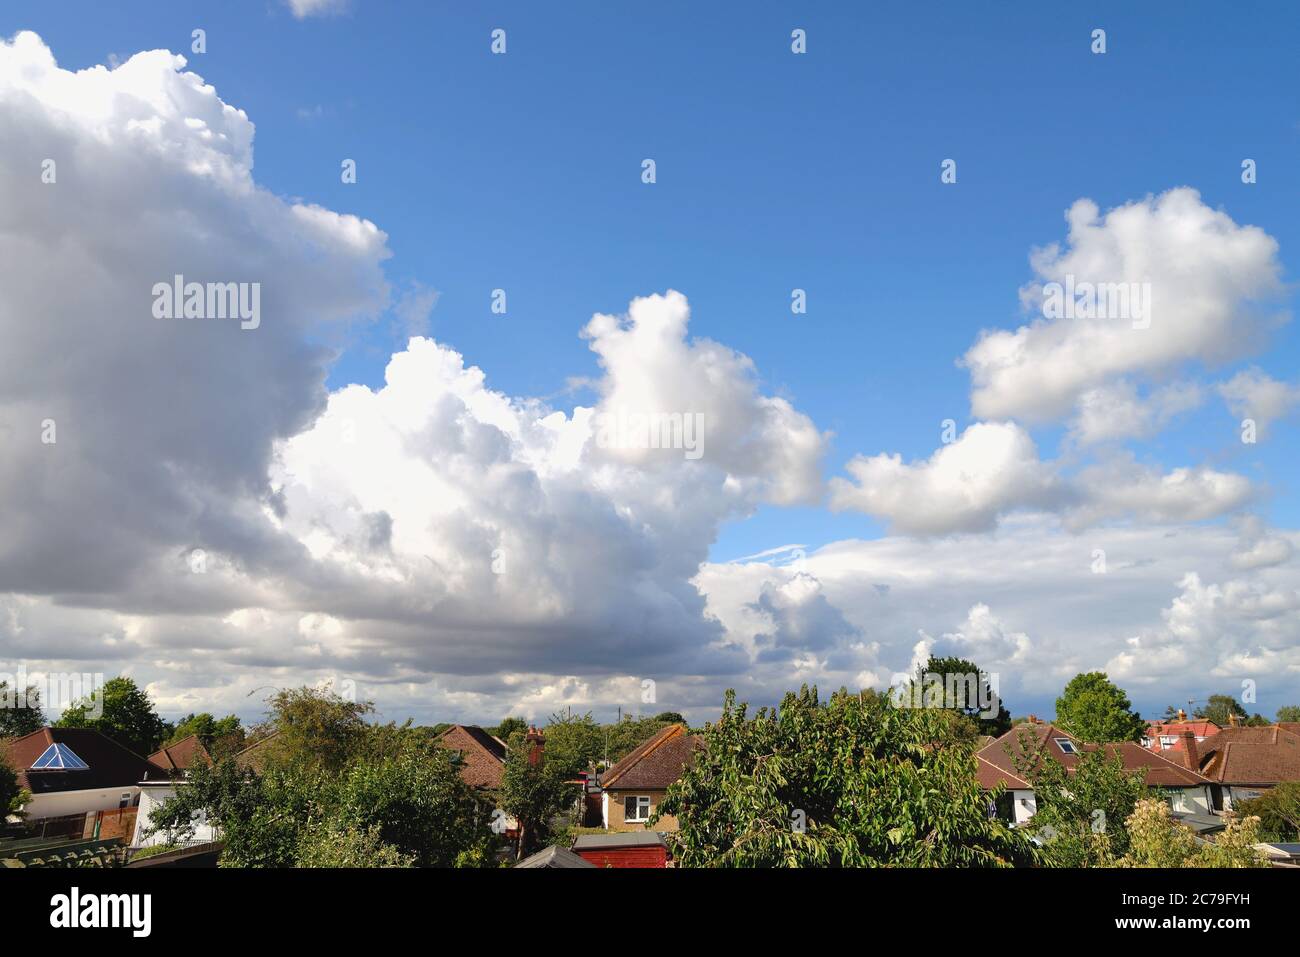 Dramatic cumulus cloud formation forming over rooftops Stock Photo